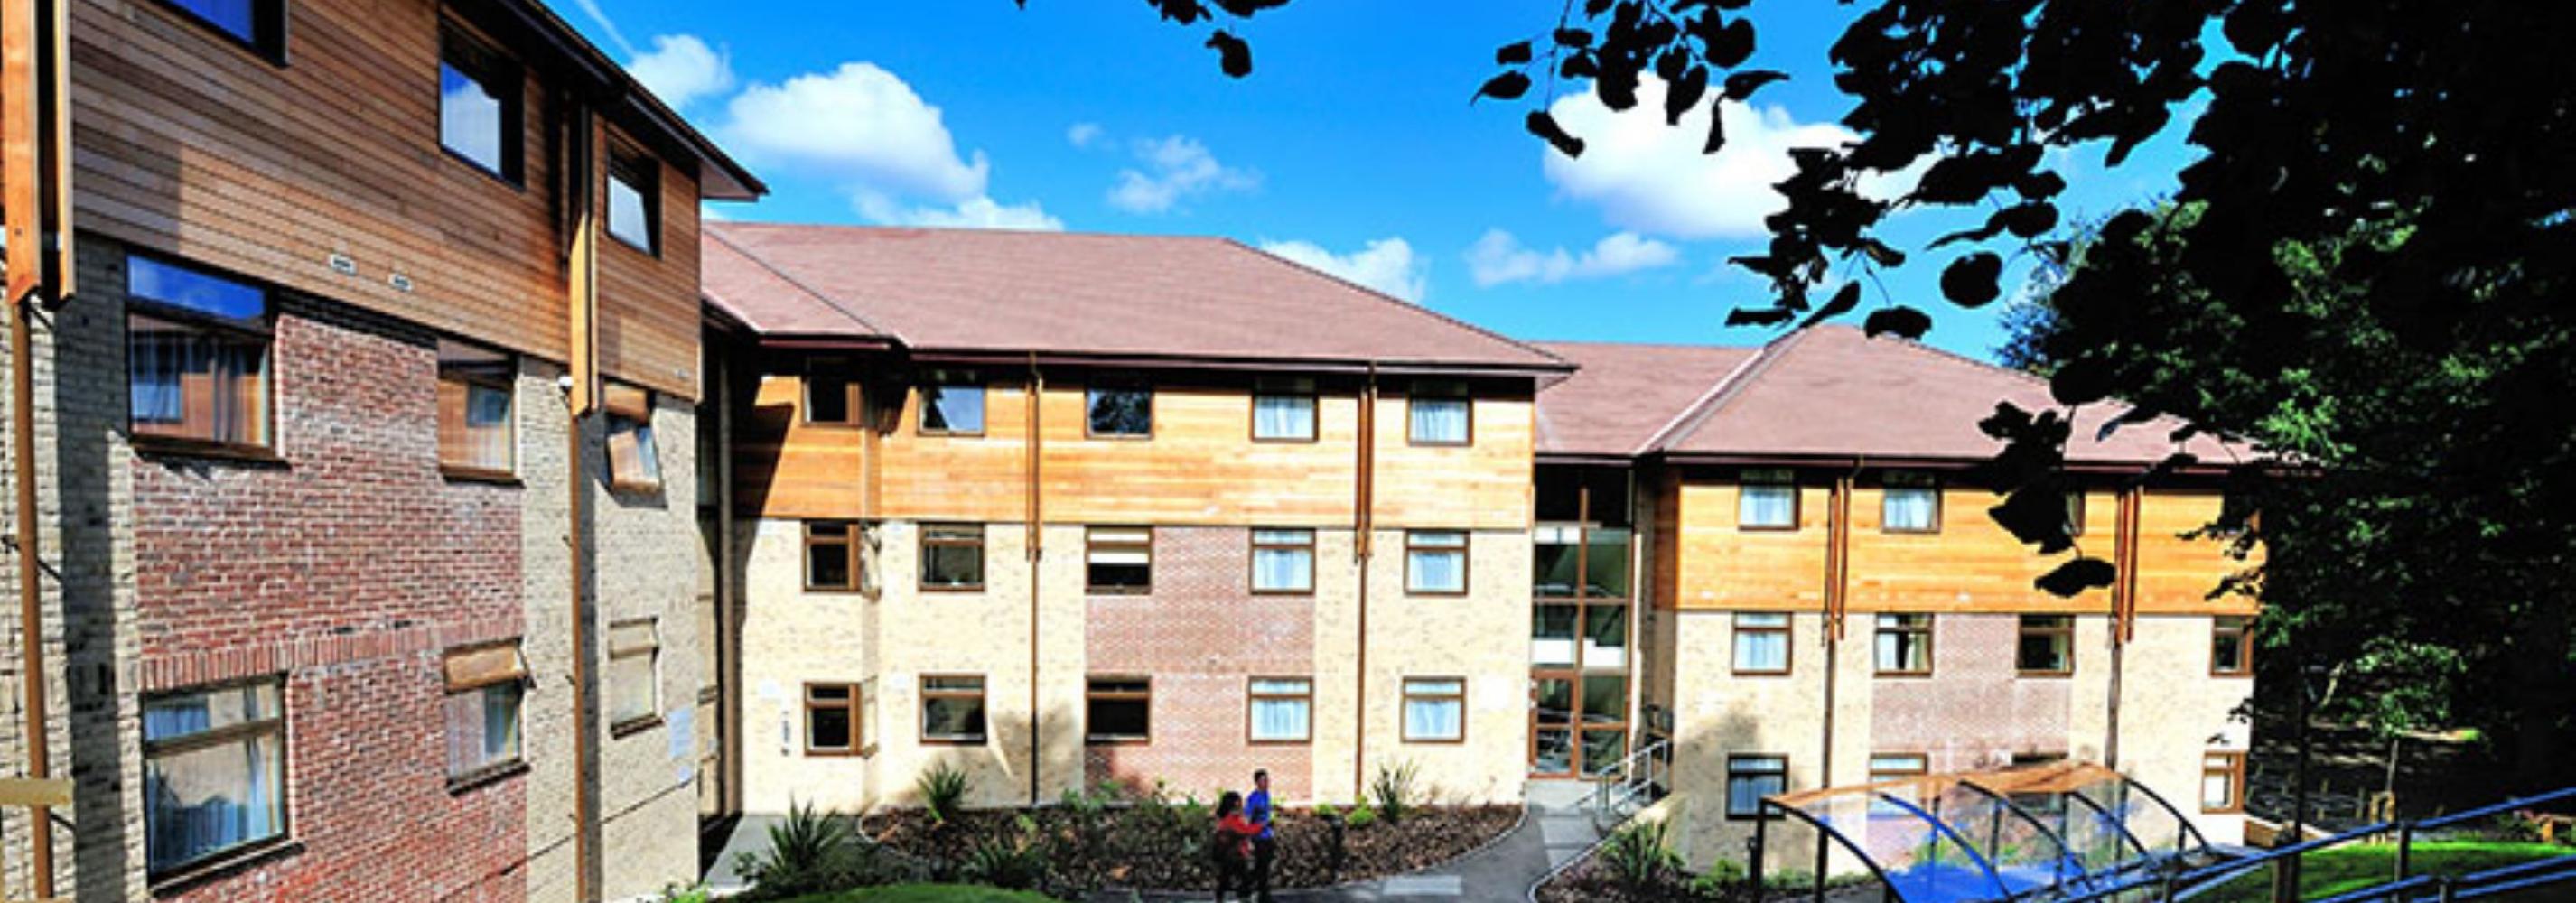 Three medium sized three floor accommodation blocks behind an arch of tree leaves and blue skies. Steps leading up away from the accommodation and covered bike storage directly in front.